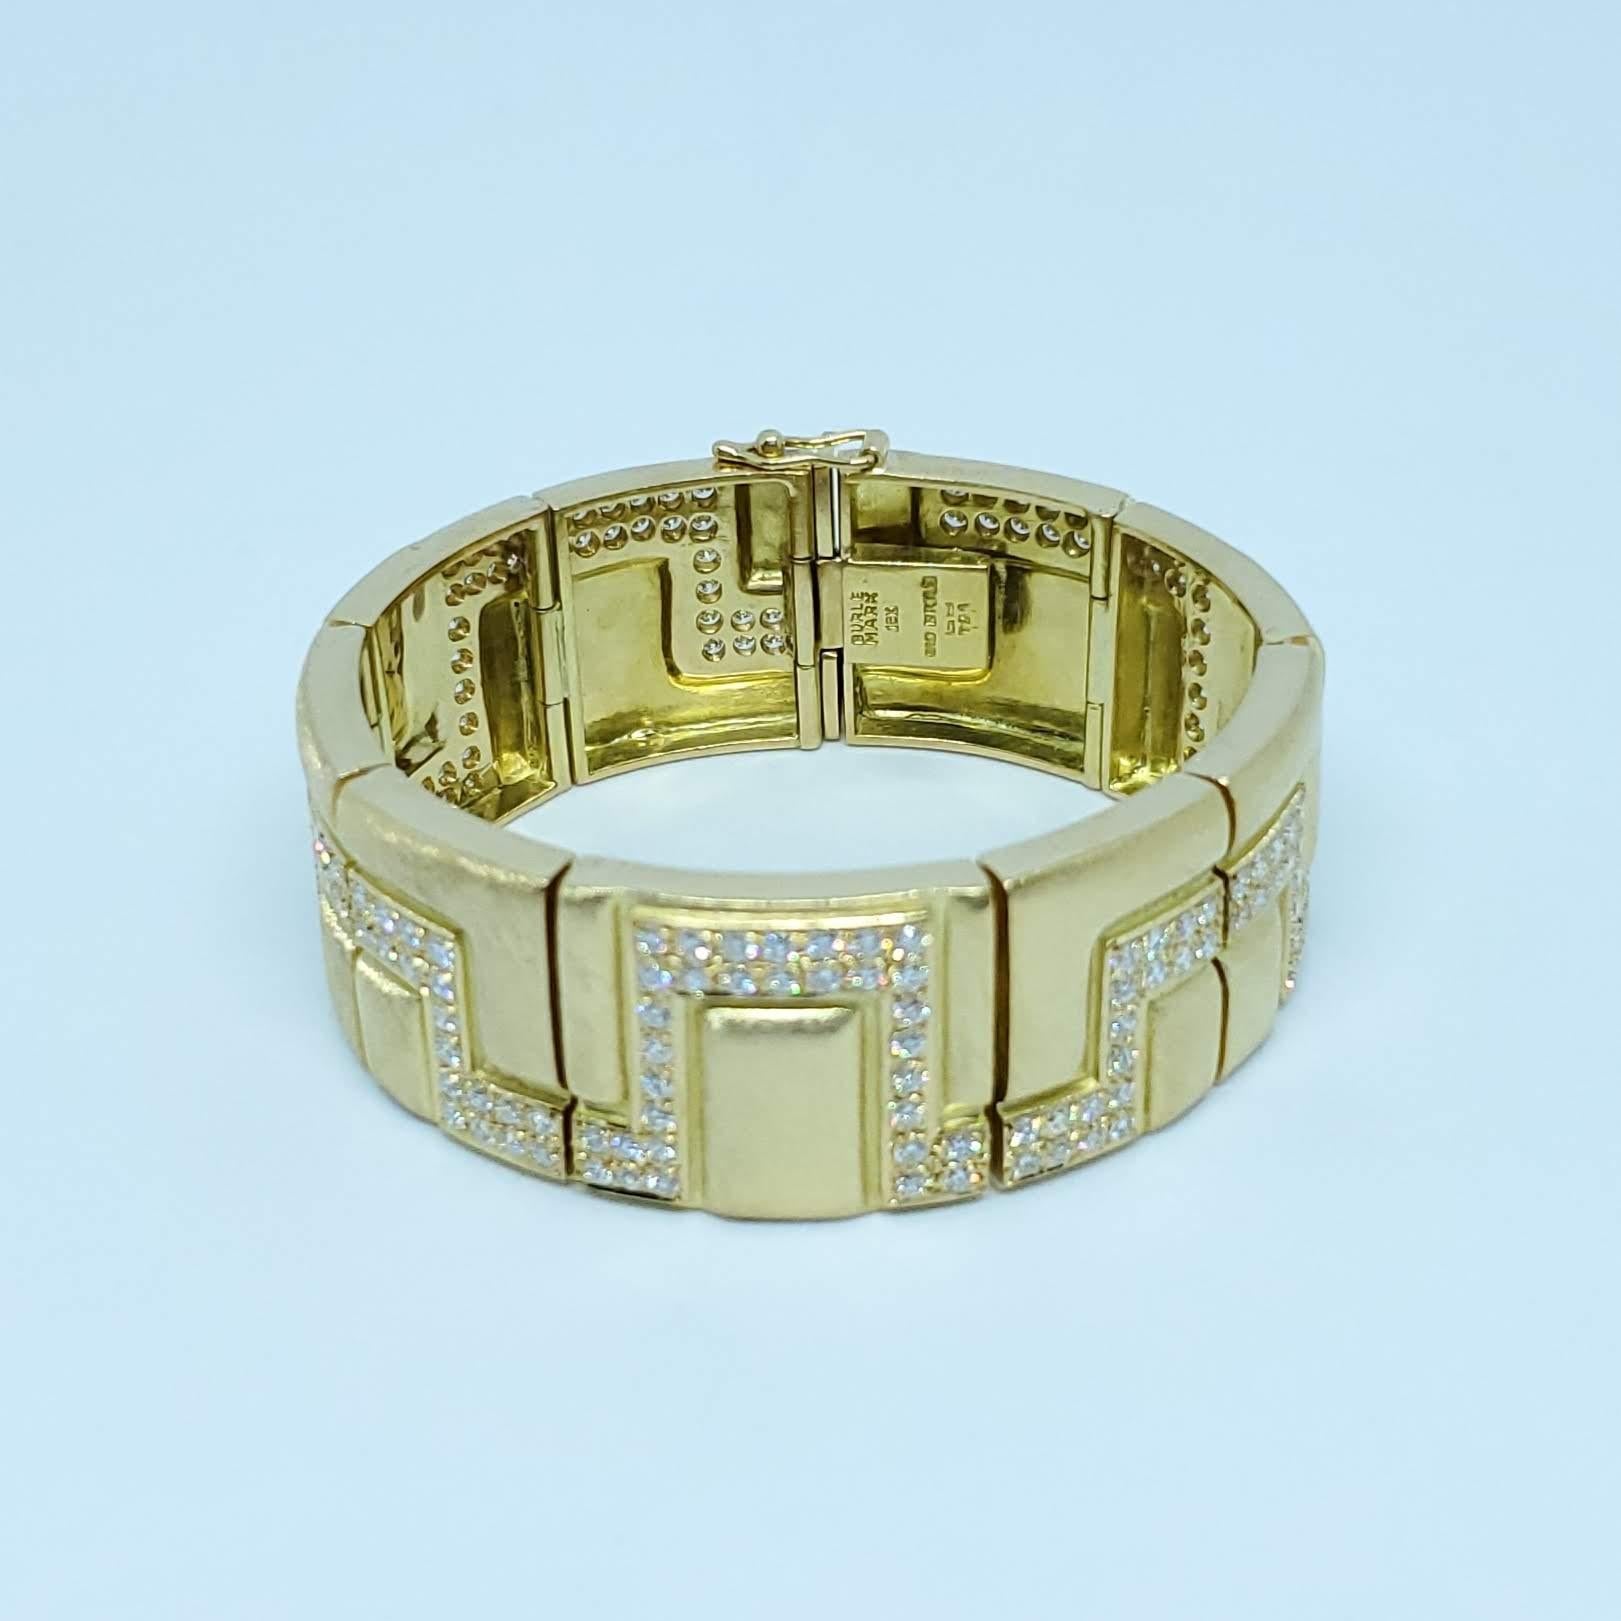 Burle Marx 18 Karat Gold Diamond Bracelet with 4.83 Carats of Diamonds In Excellent Condition For Sale In Woodway, TX